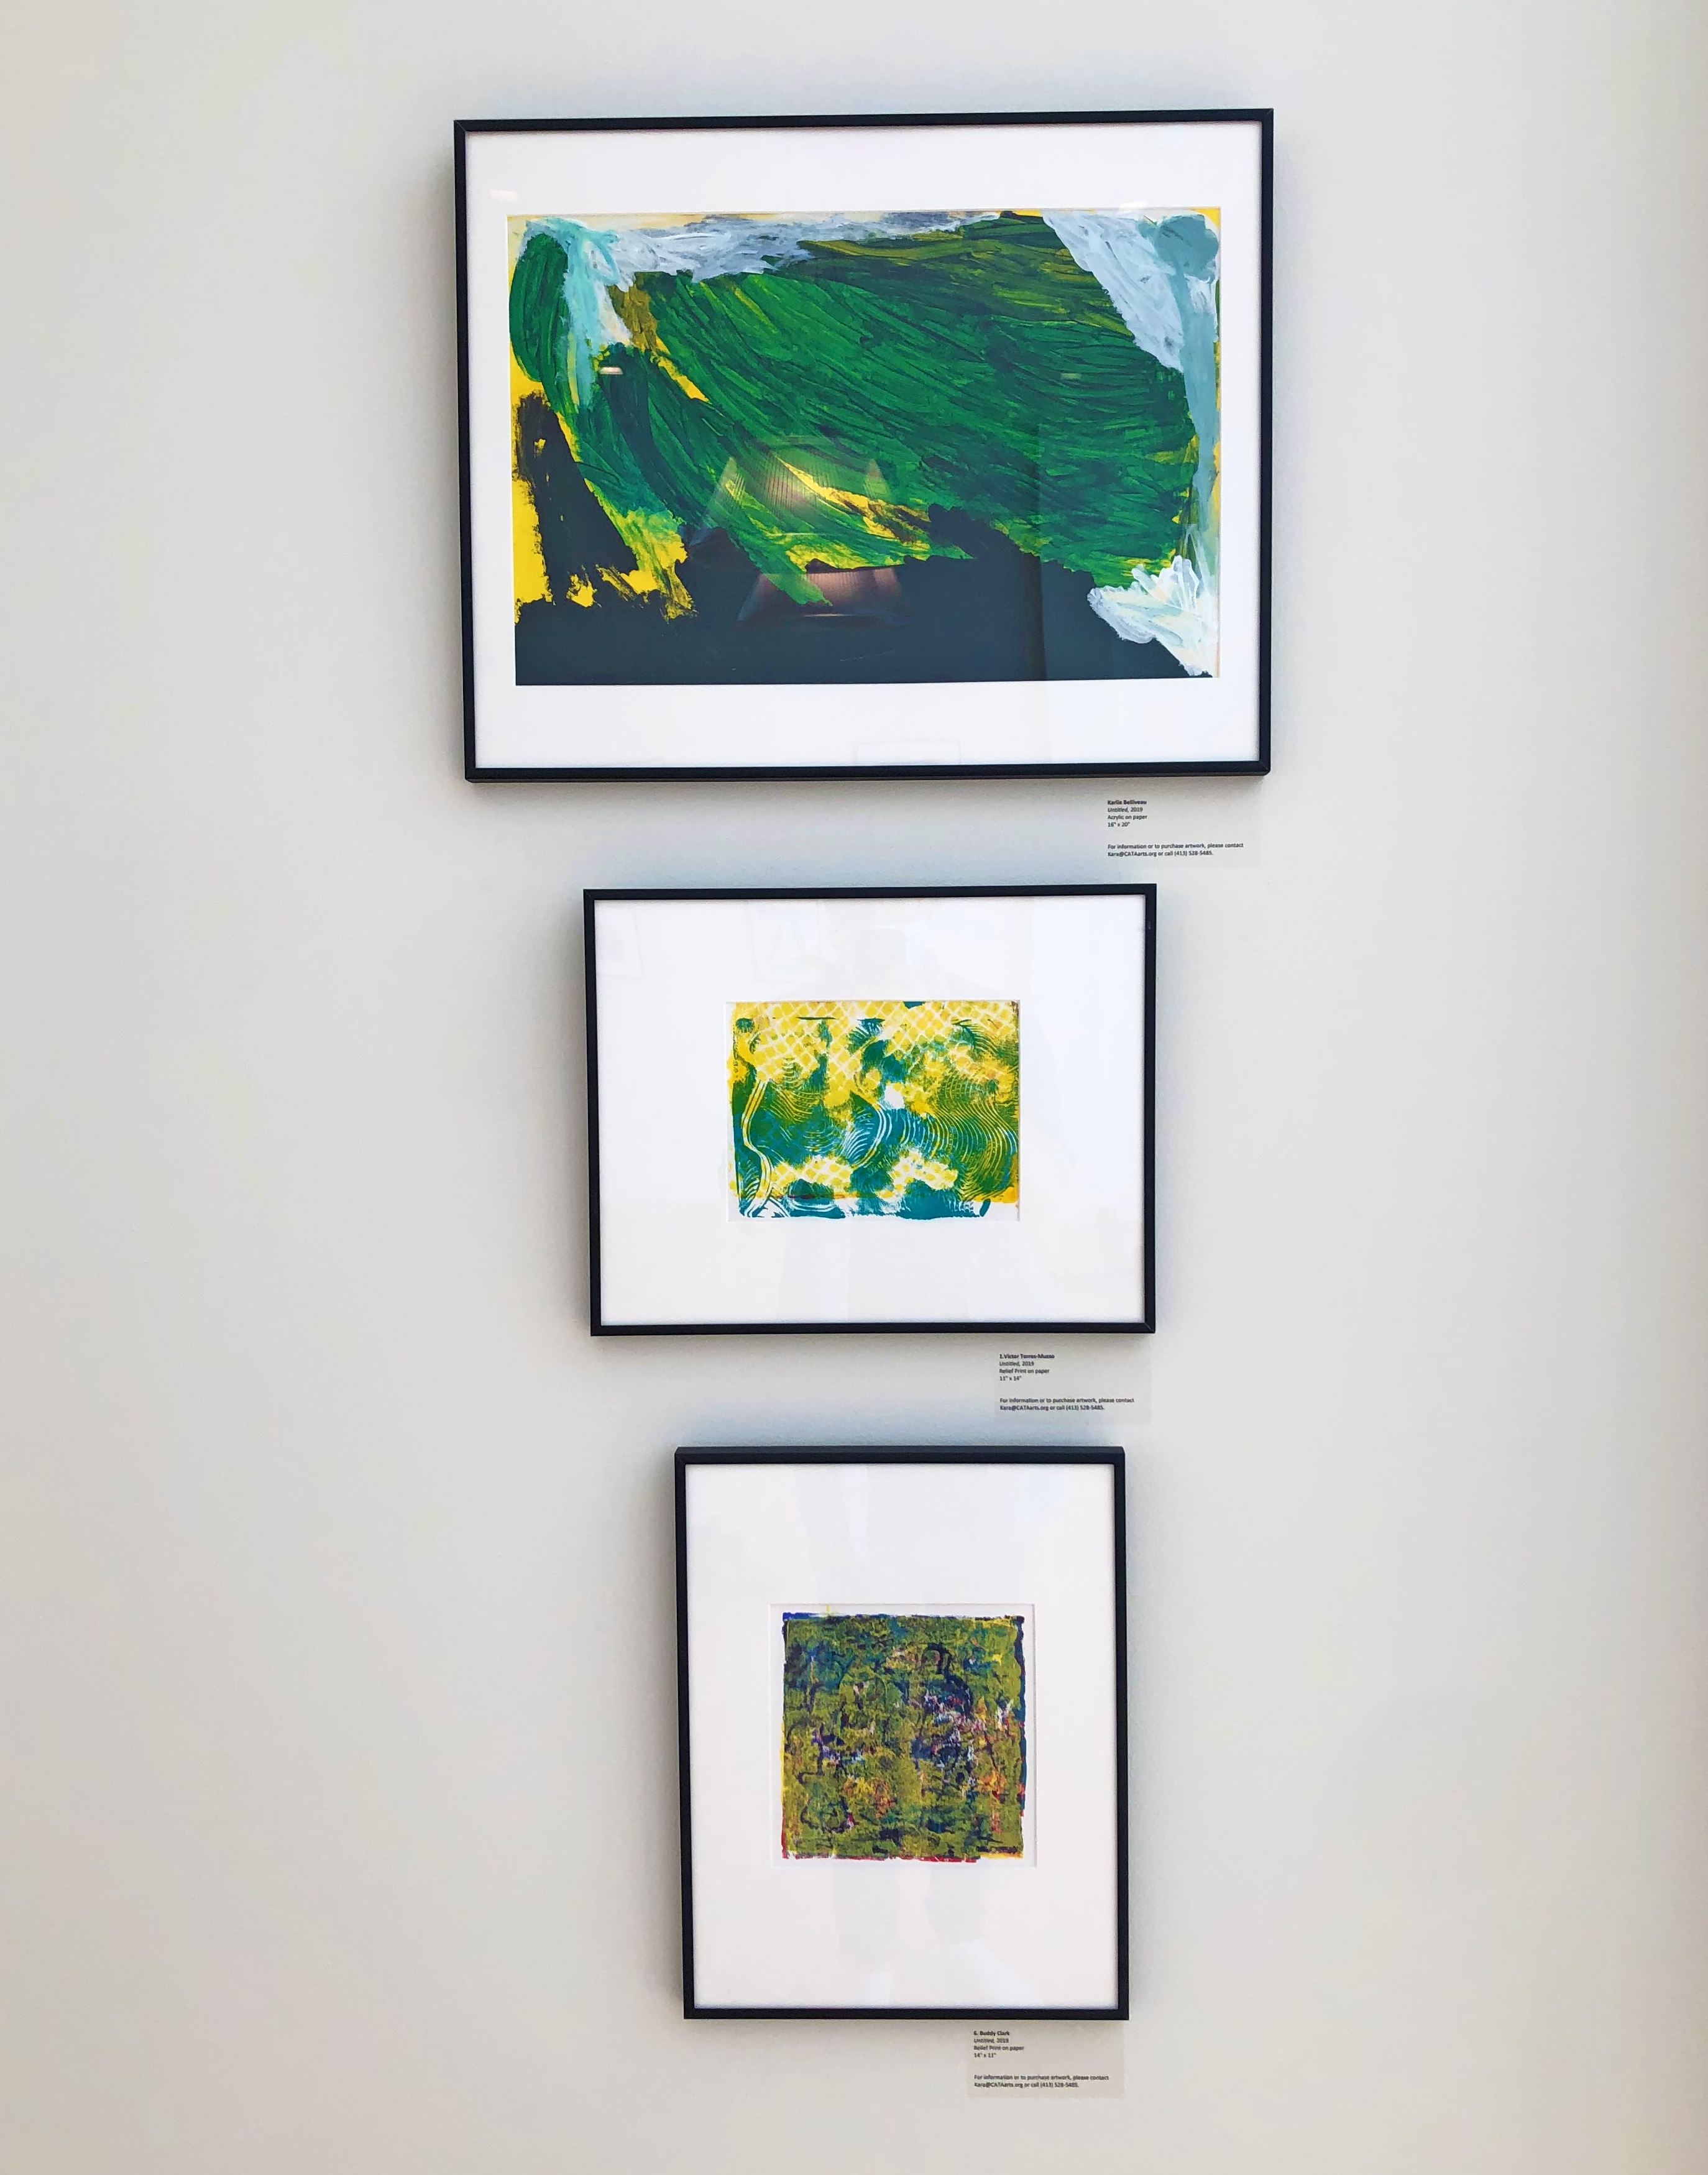 Three paintings on a wall